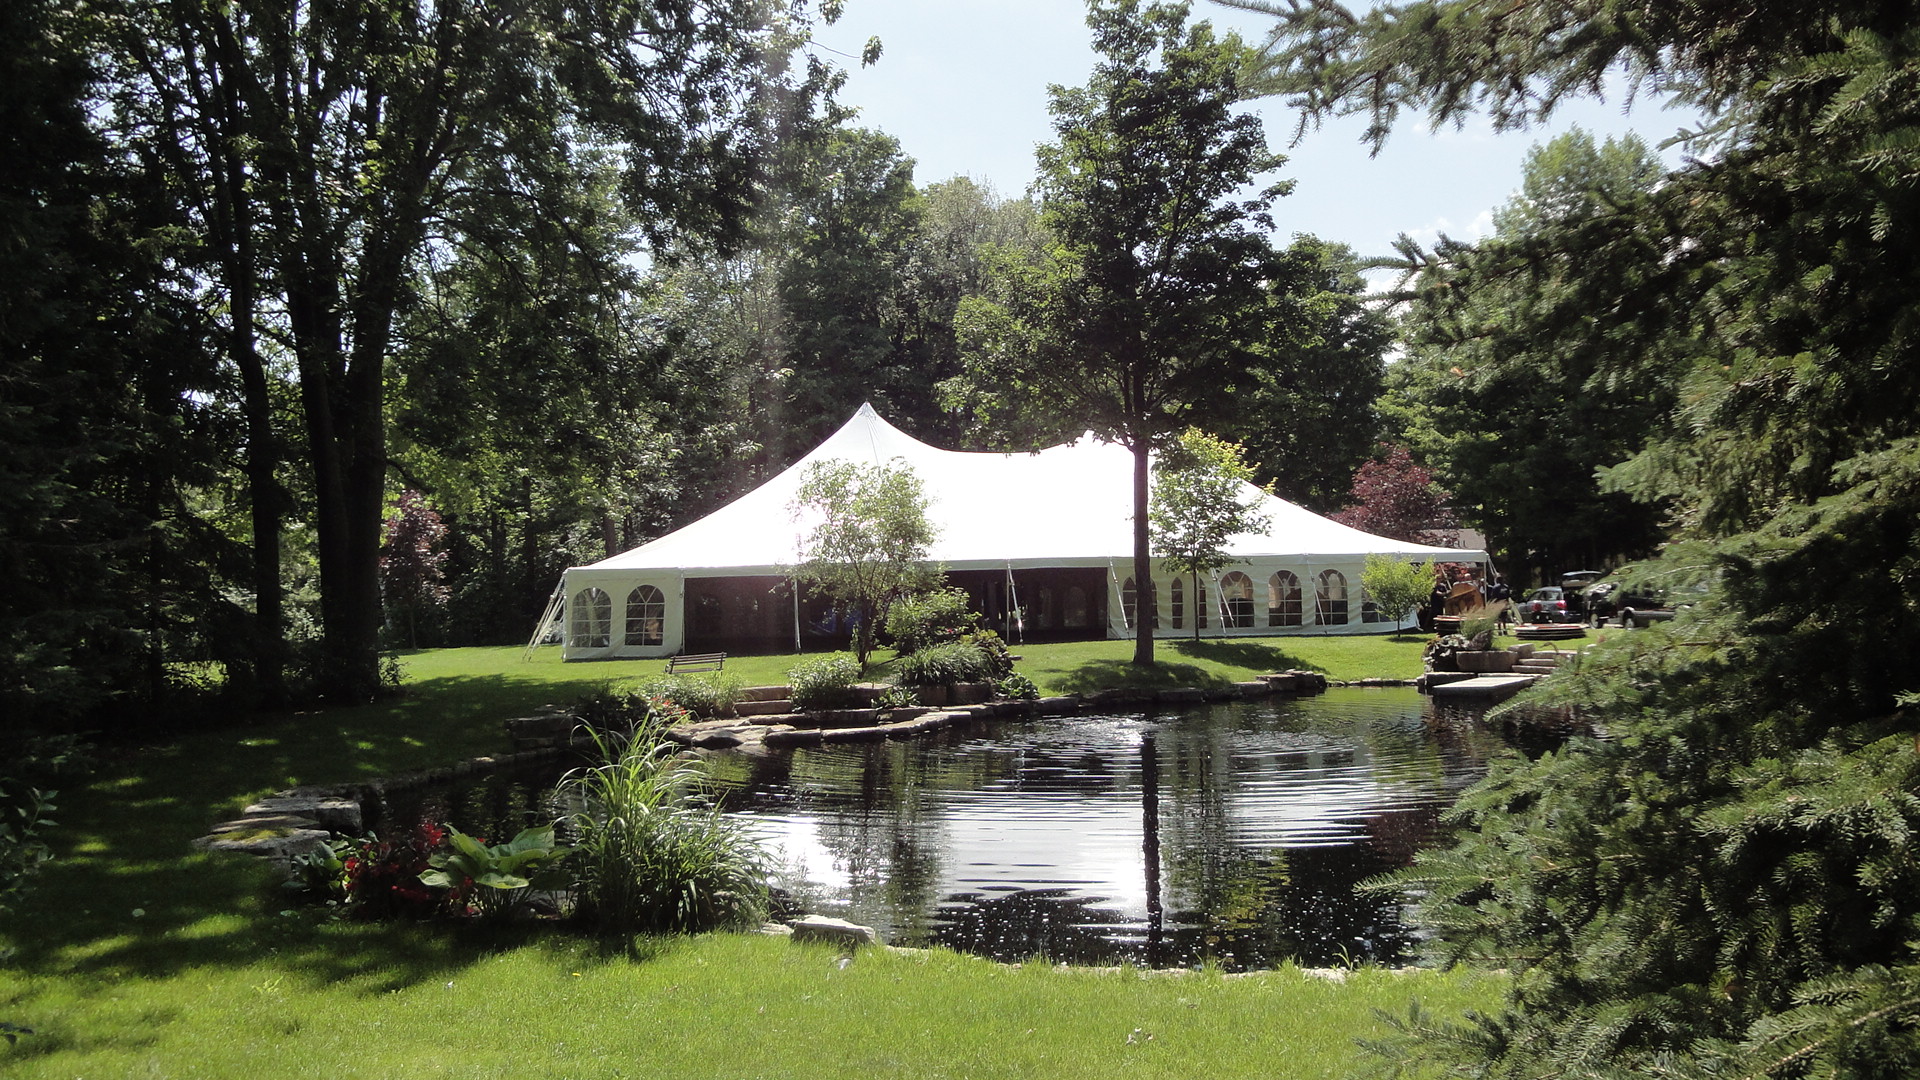 60 X 90 WHITE POLE TENT (For up to 540 people)